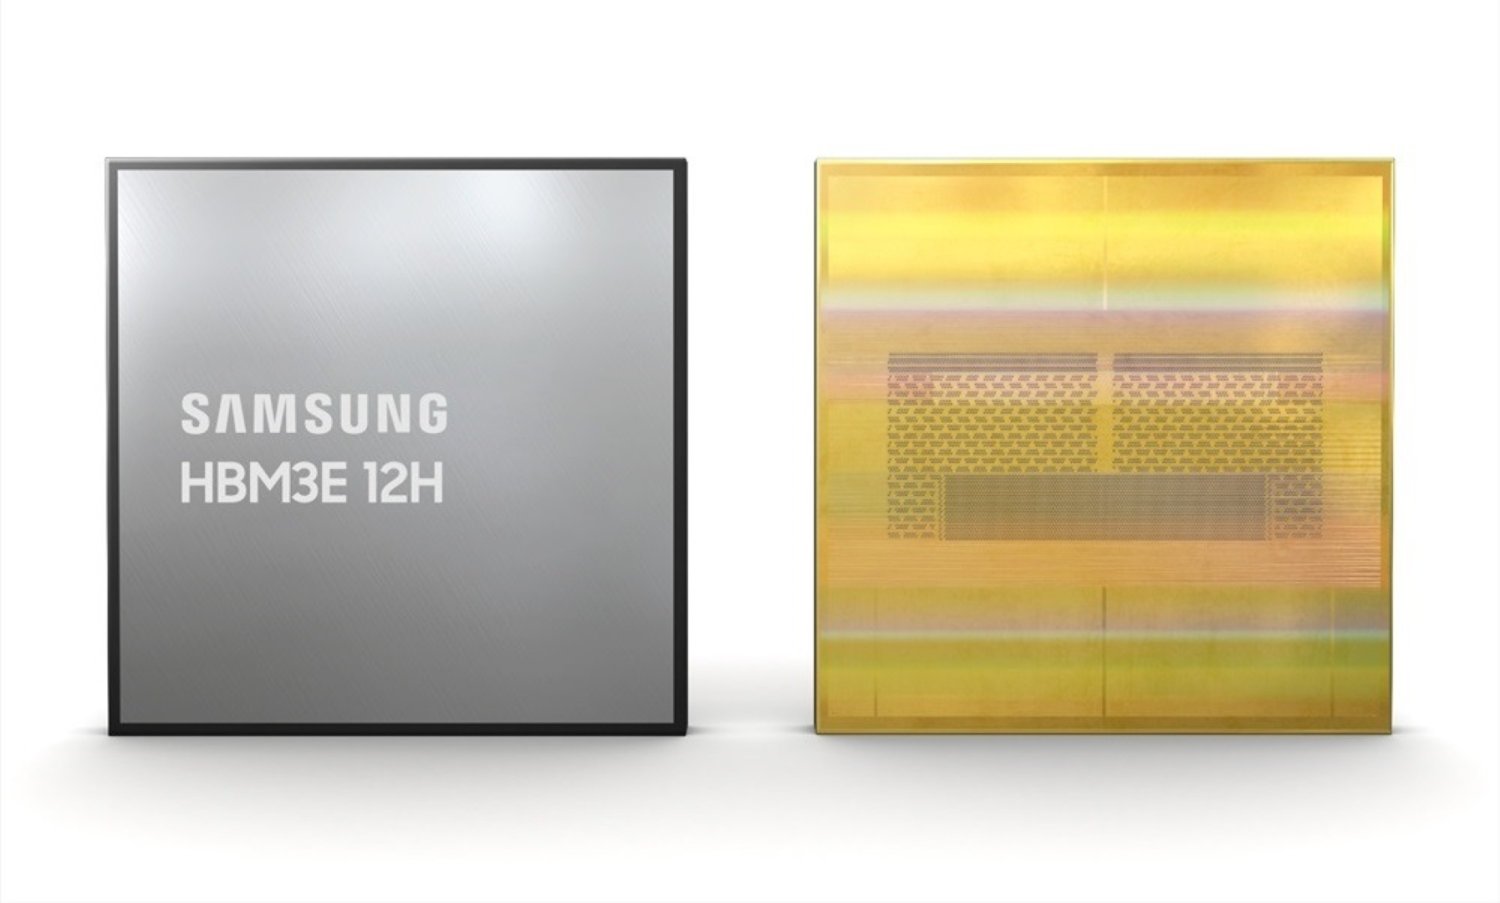 Samsung teases industry-first 36GB HBM3e 12-Hi memory stack, coming soon